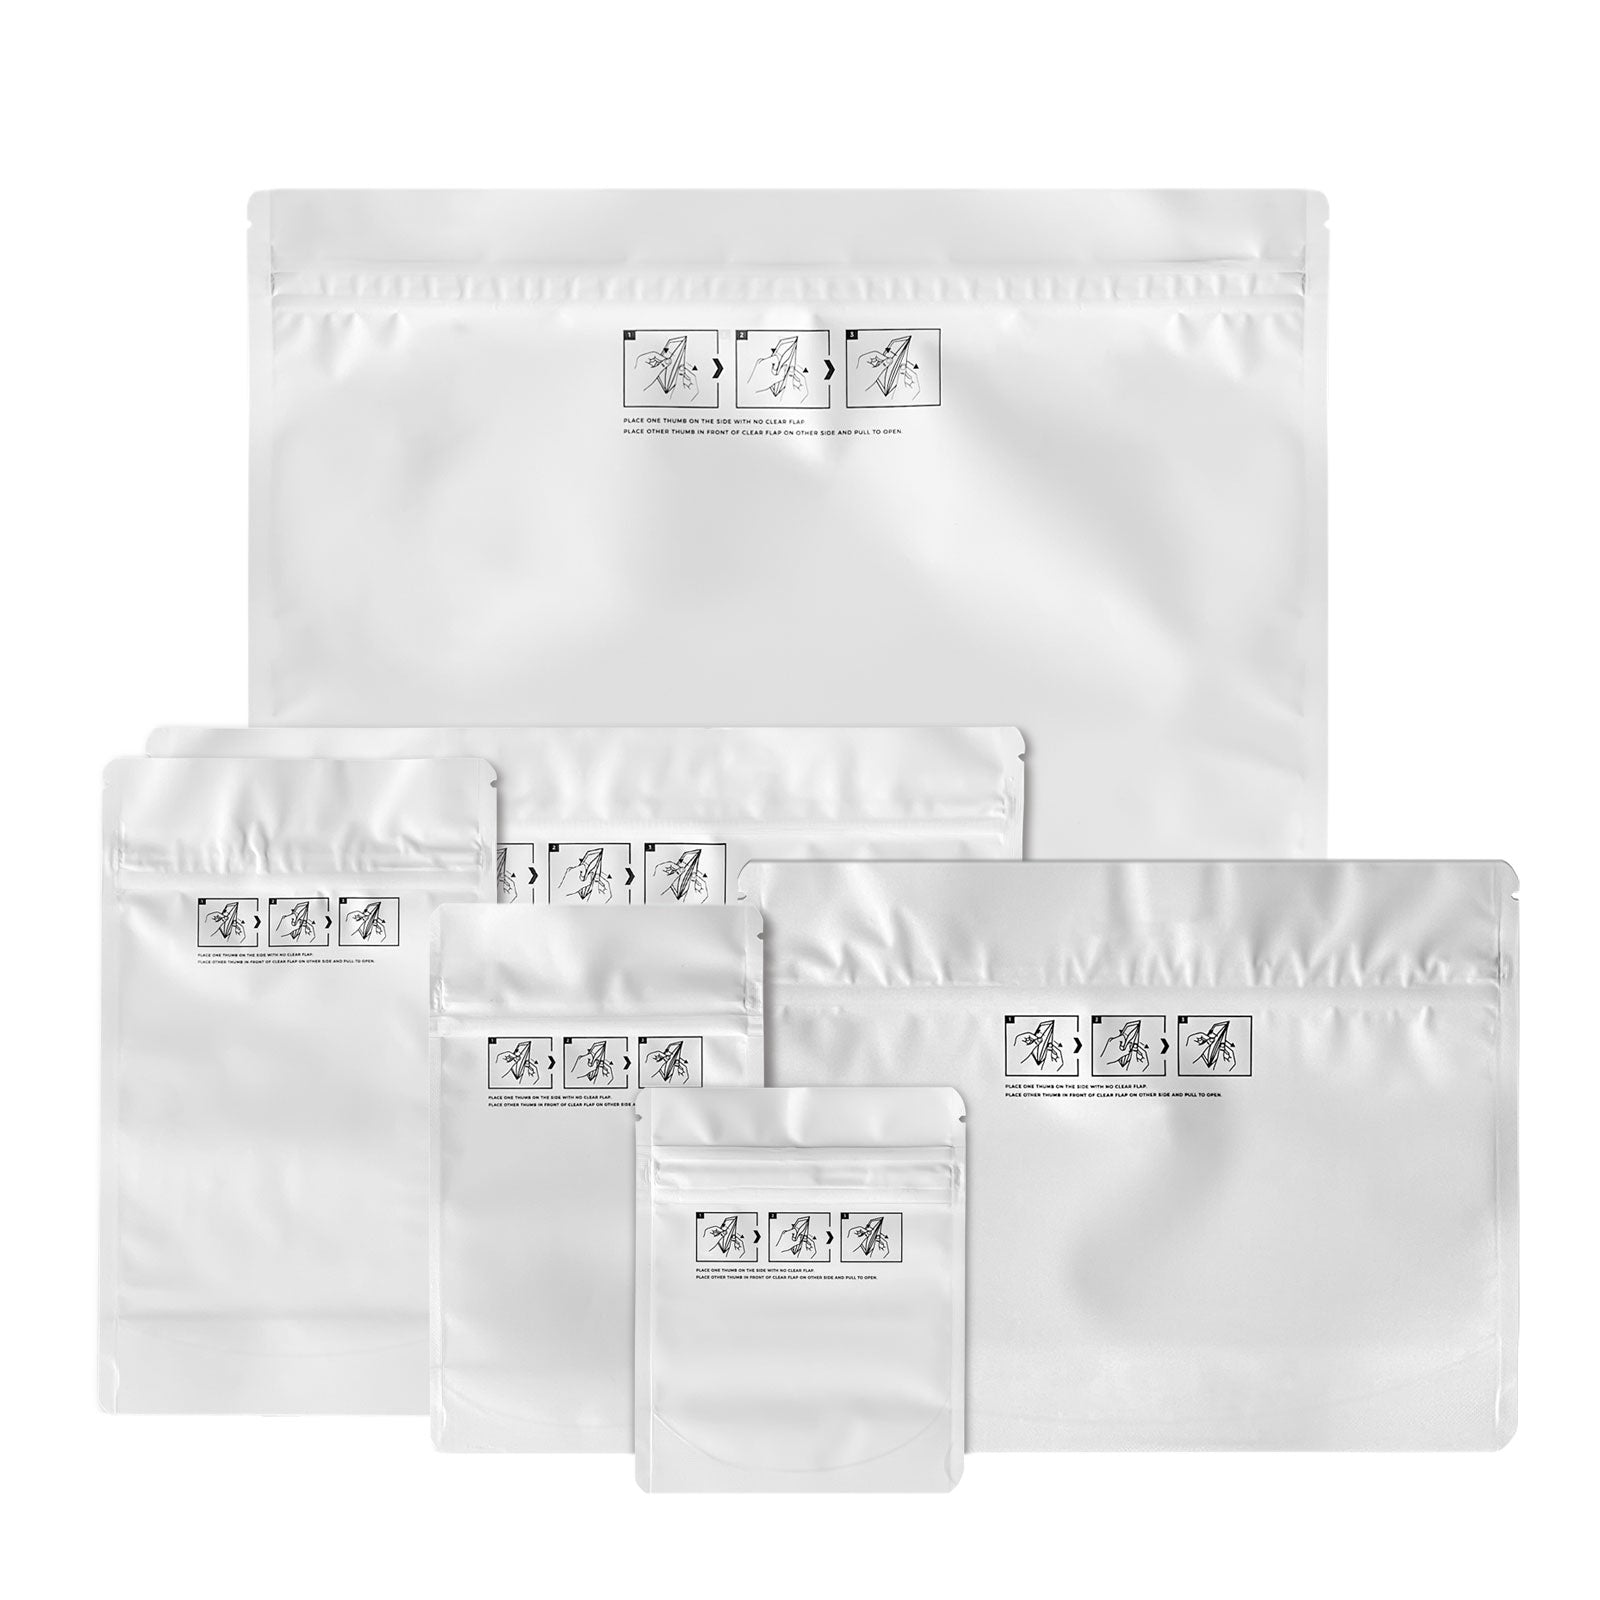 14.6"x16.4"+4" Extra Large Child Resistant 1-3 lbs Exit Bags All White - 20 Count